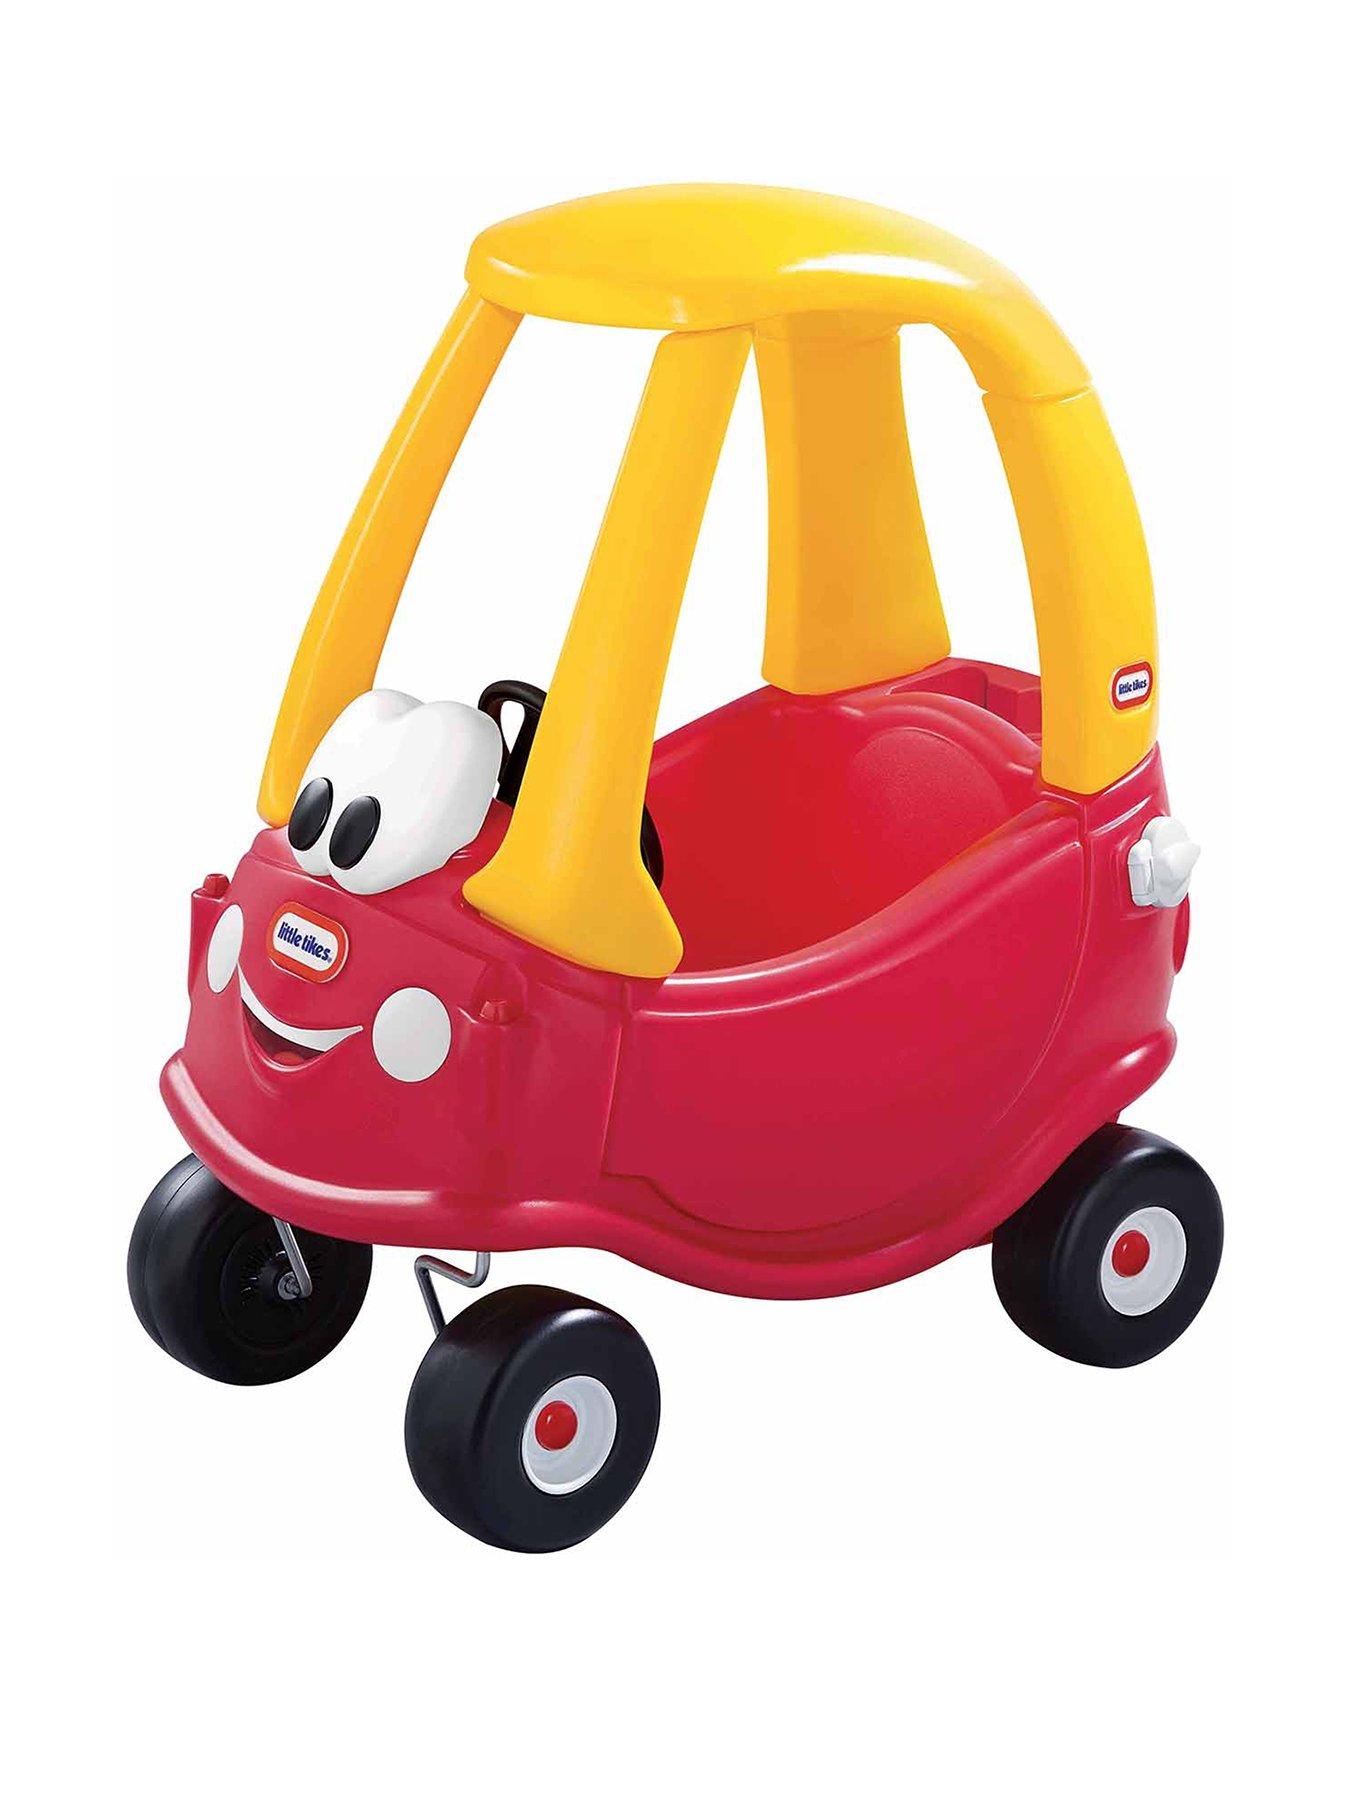 red and yellow toy car little tikes